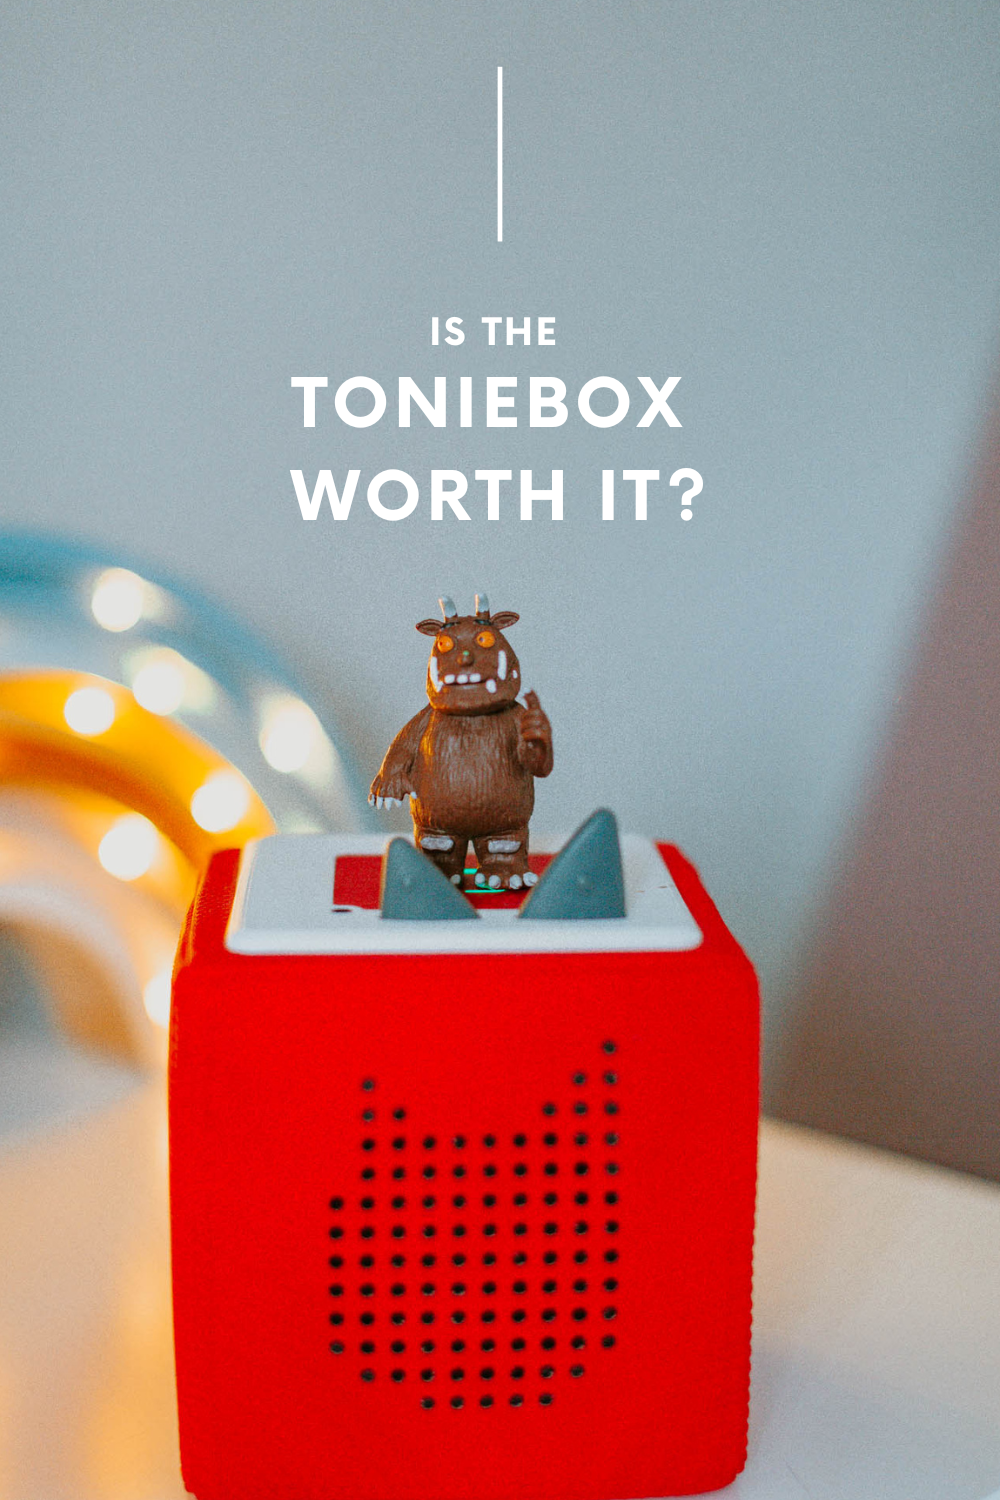 is the toniebox worth it?